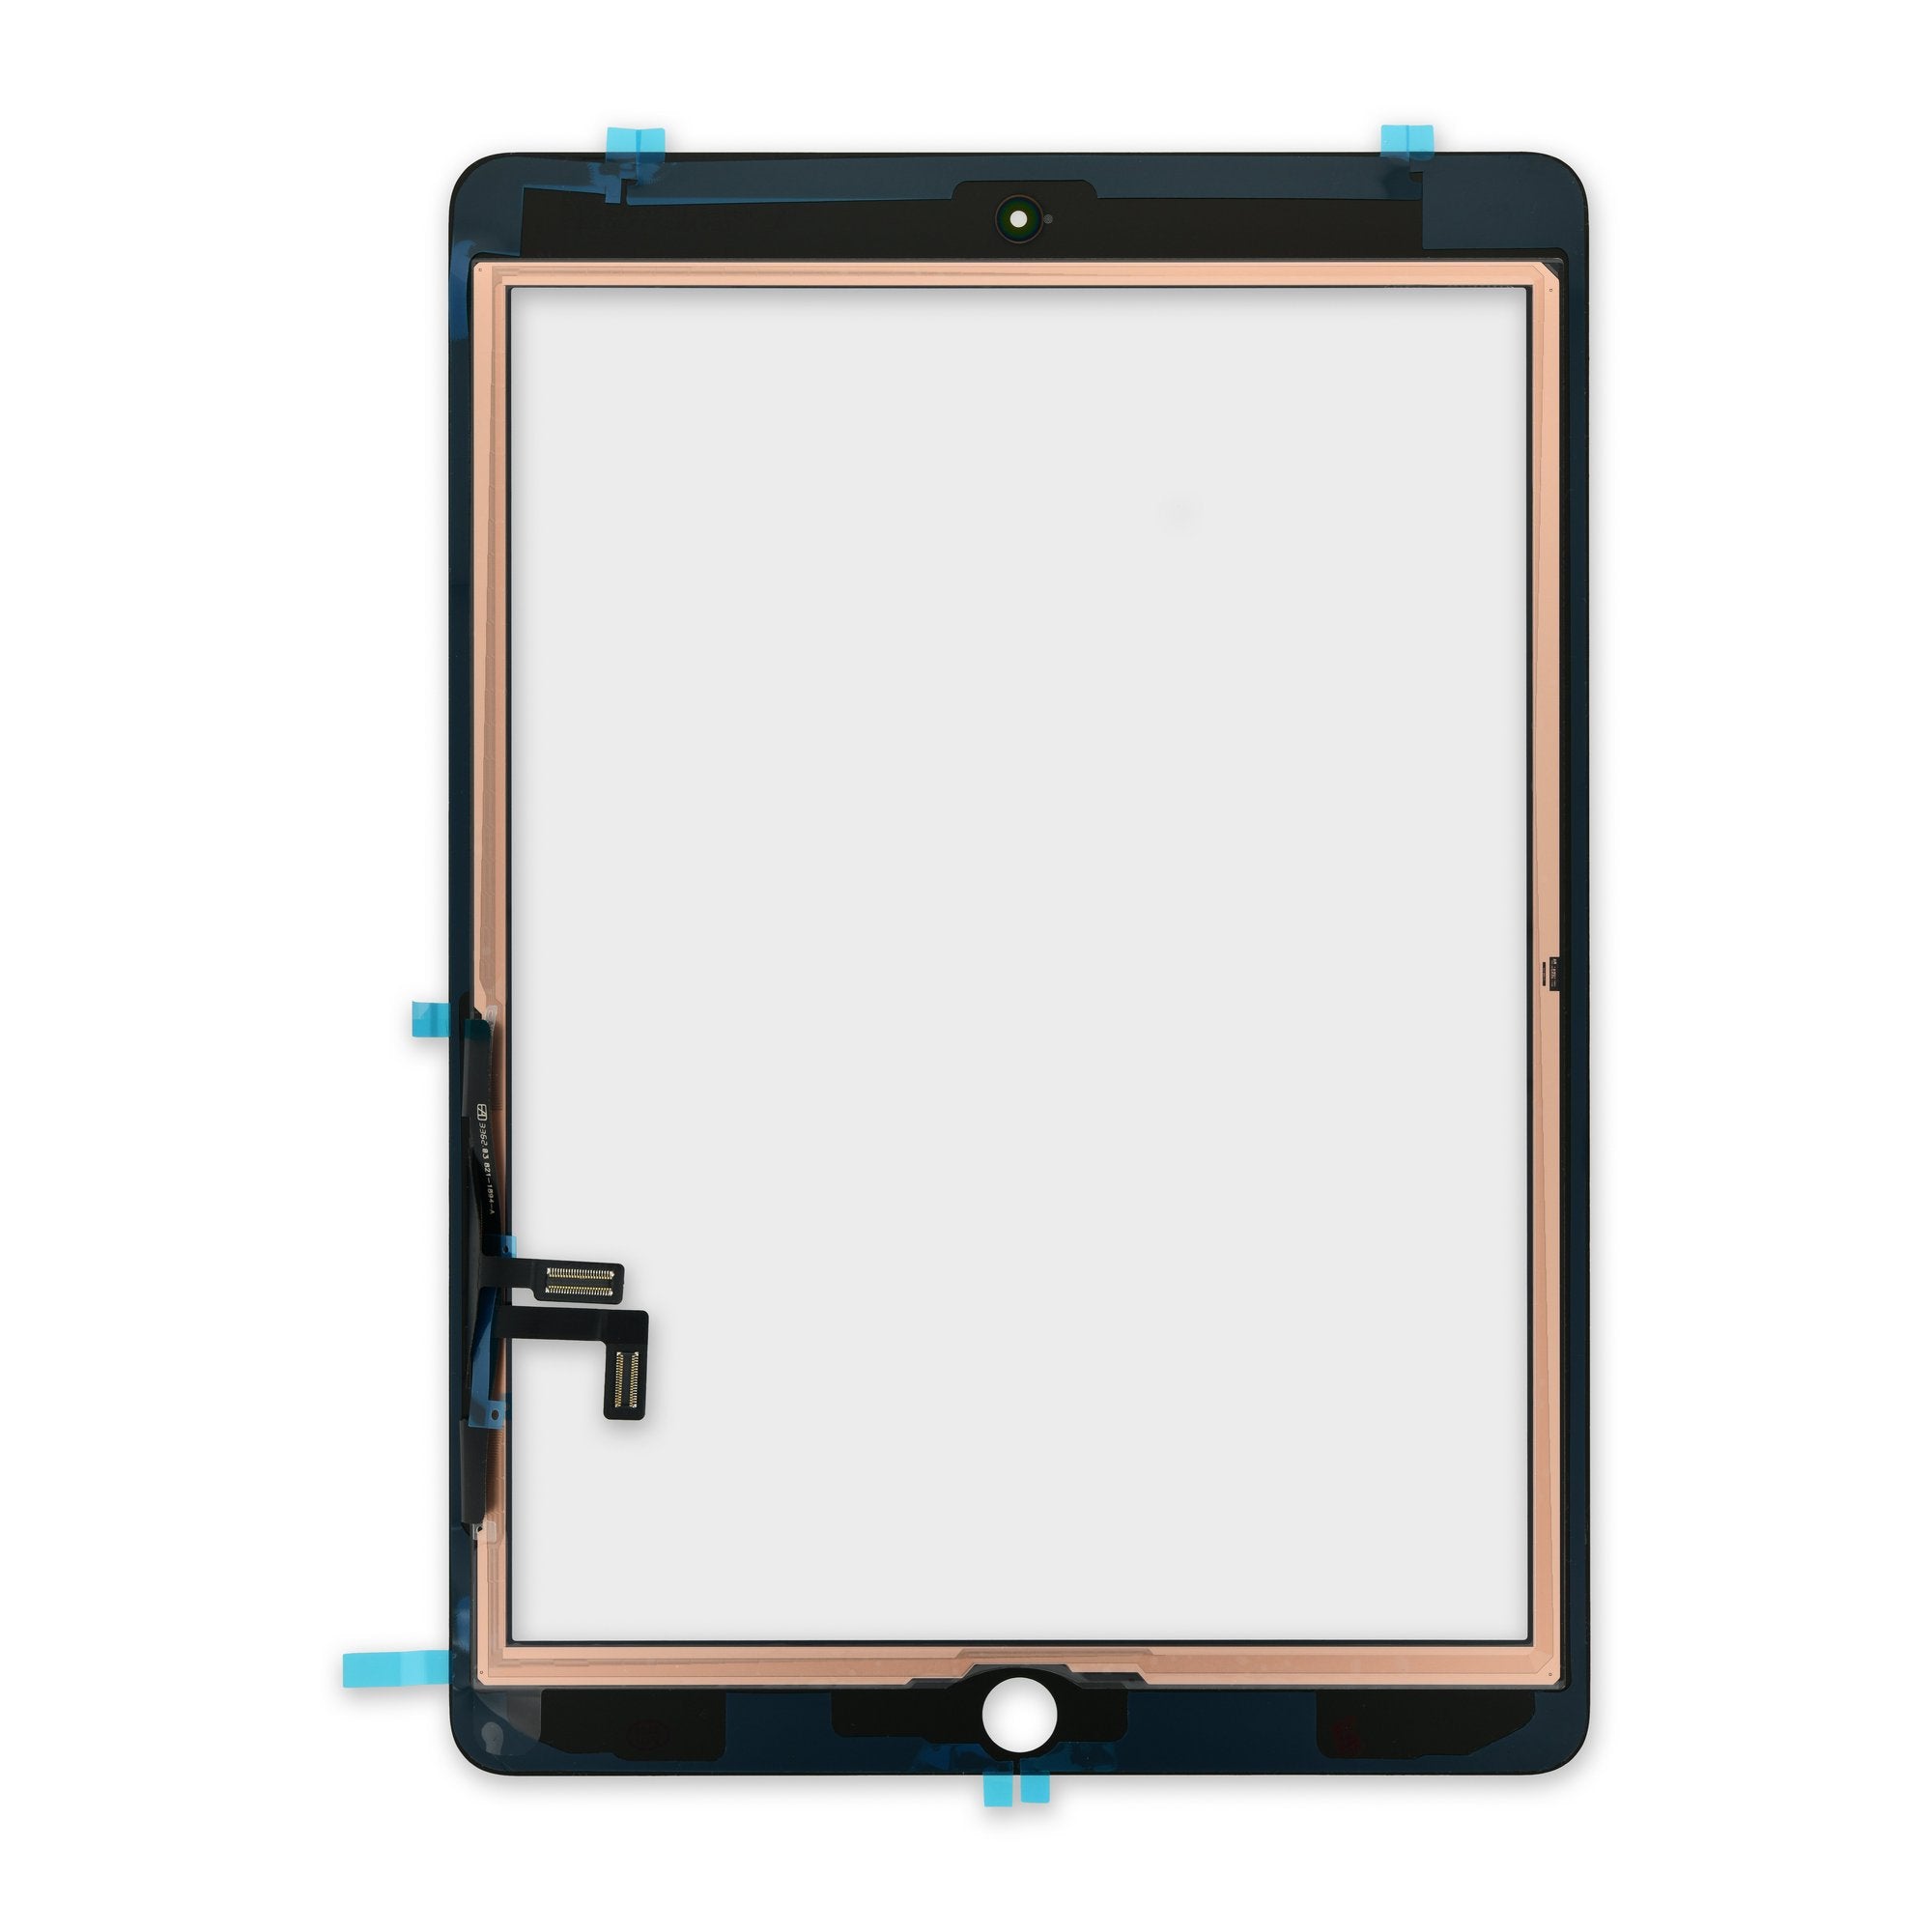 iPad 5 A1822 Screen: Glass Digitizer Replacement Kit - iFixit